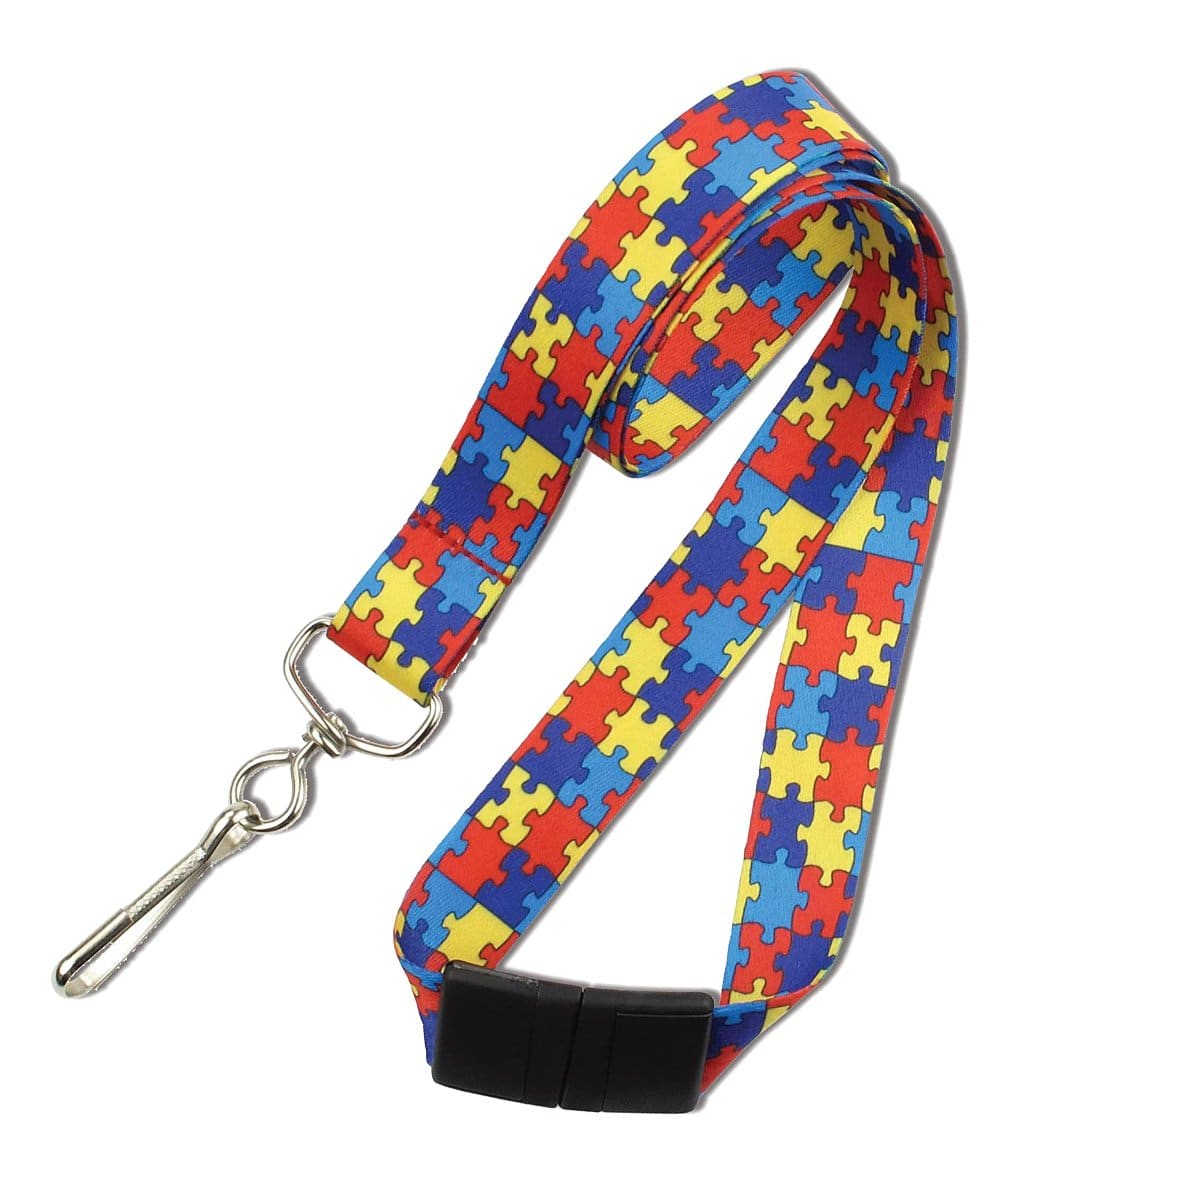 A colorful Autism Awareness Flat Breakaway Lanyard With Swivel Hook (2138-5281, 2138-5282) with a puzzle piece pattern in red, blue, yellow, and green, featuring a metal swivel hook clasp.